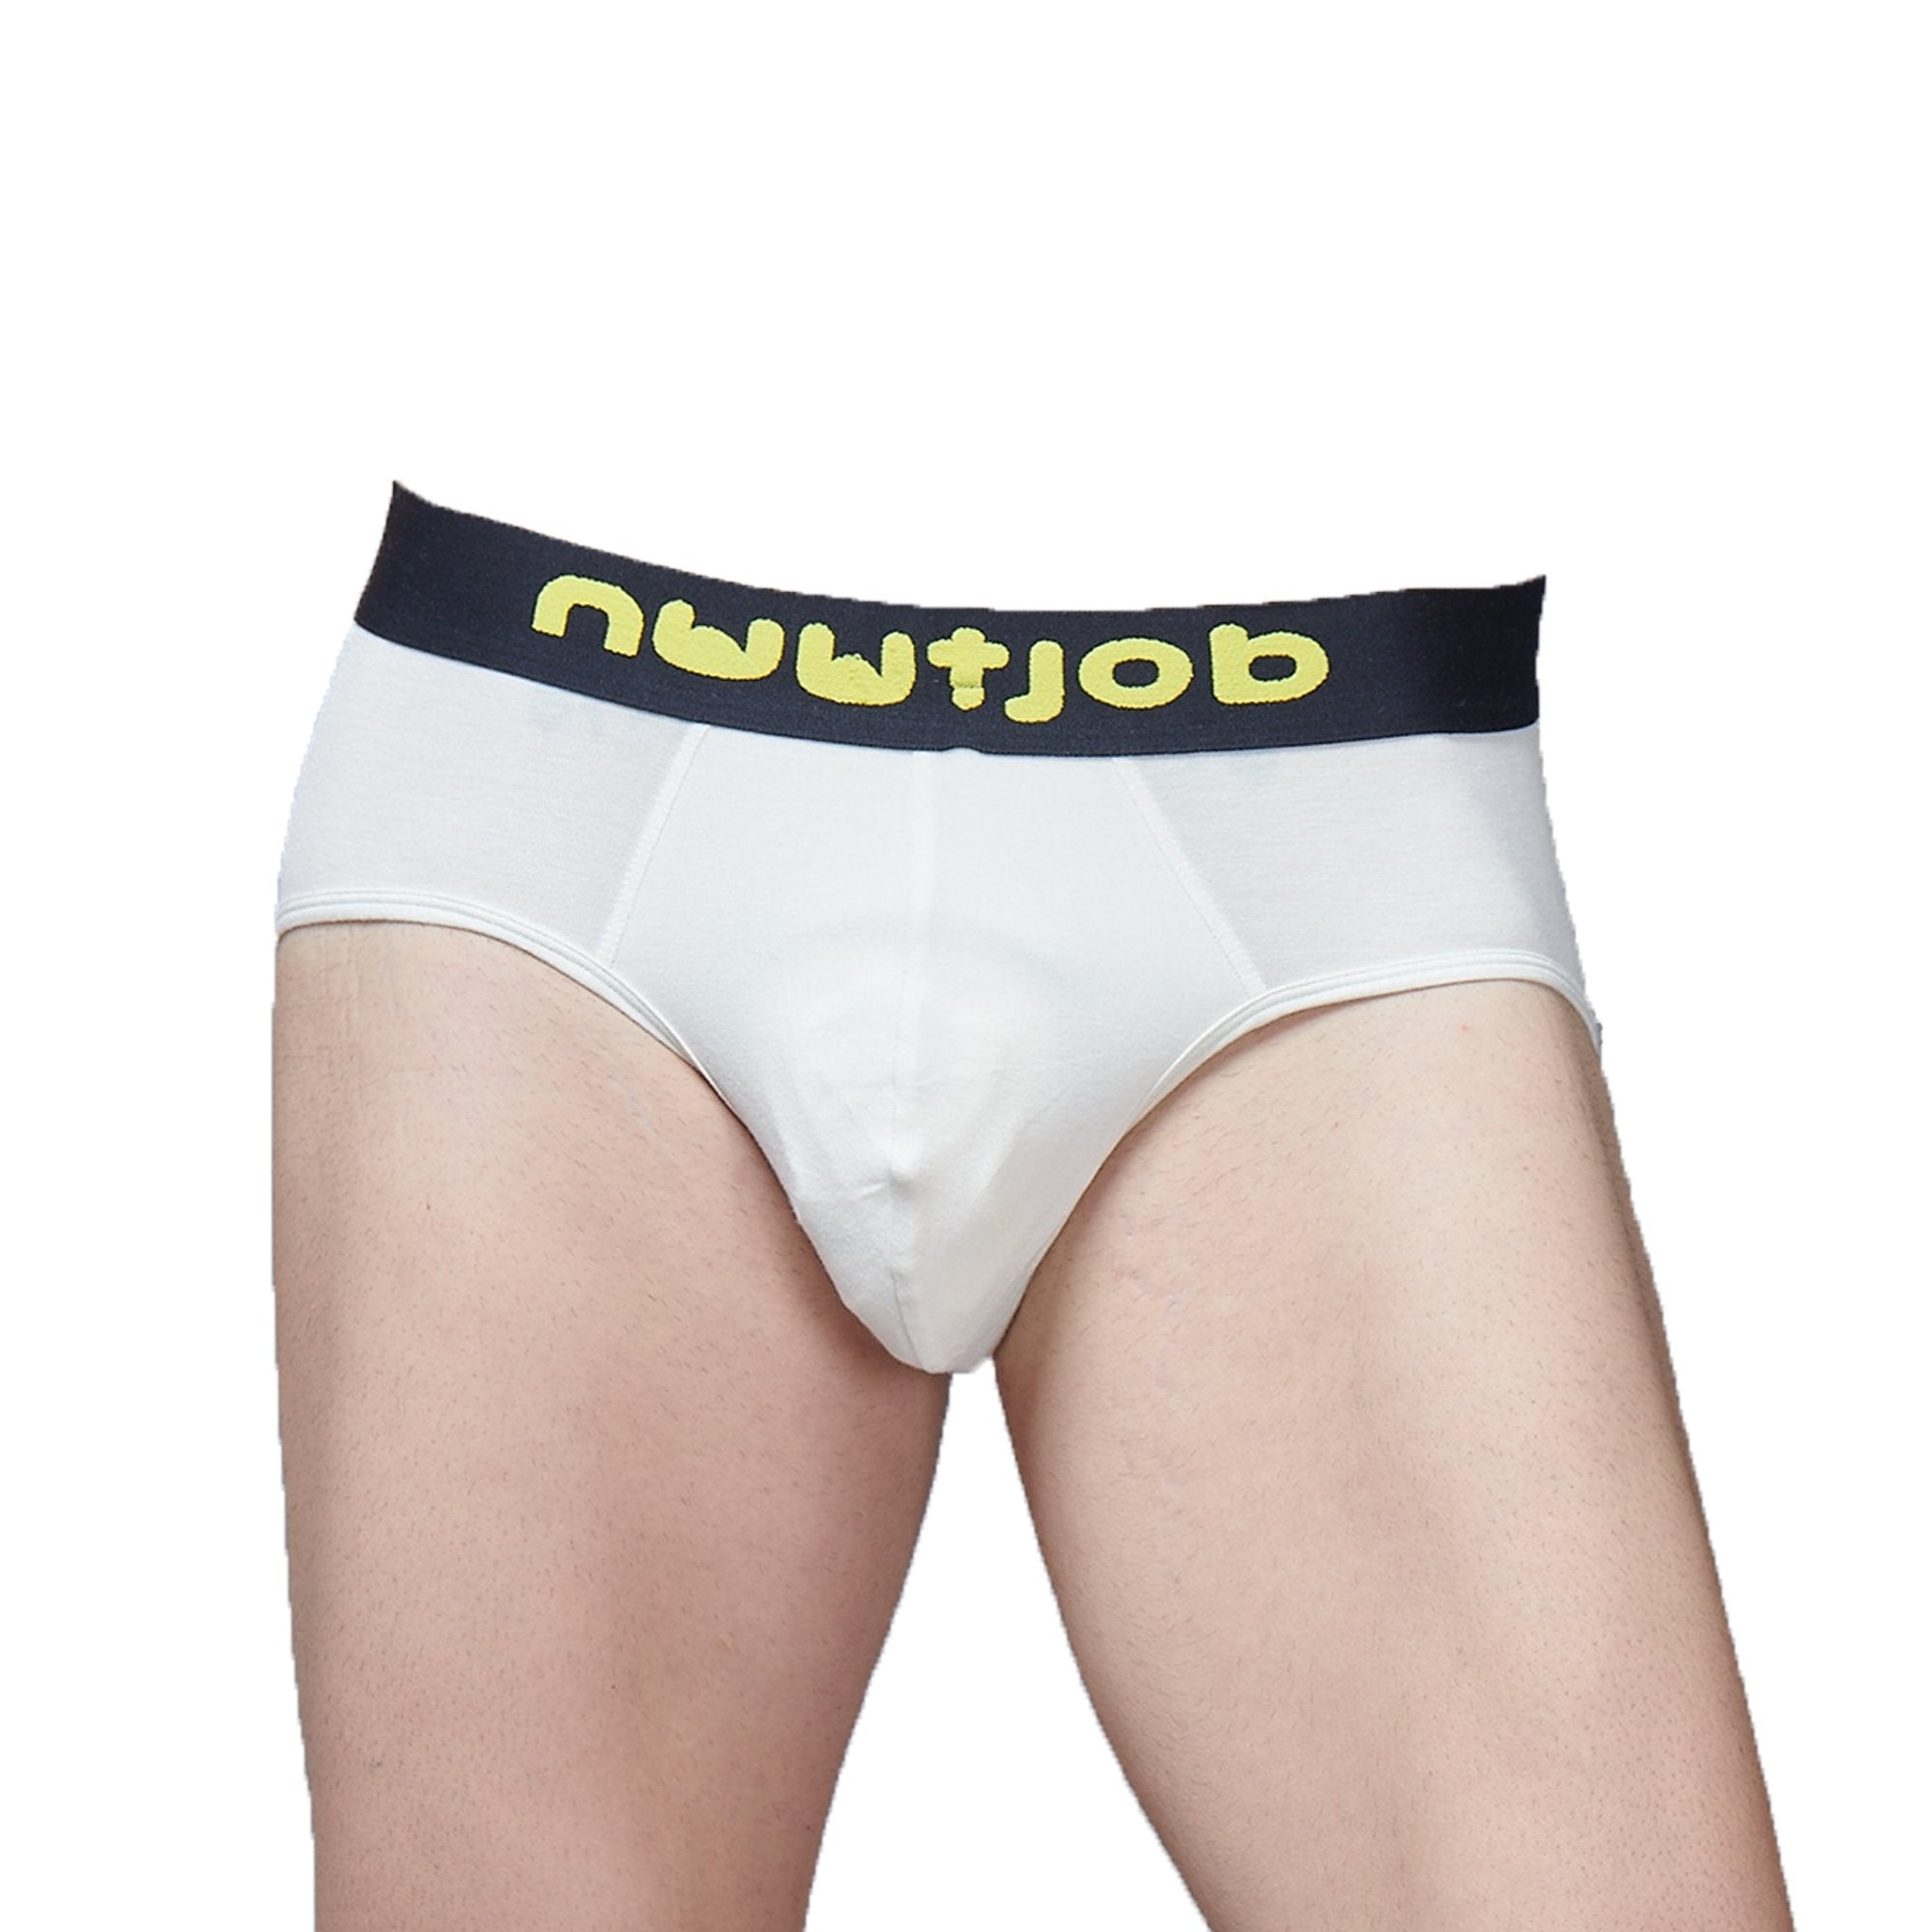 Bamboo Briefs for Men are comfortable & anti-bacterial